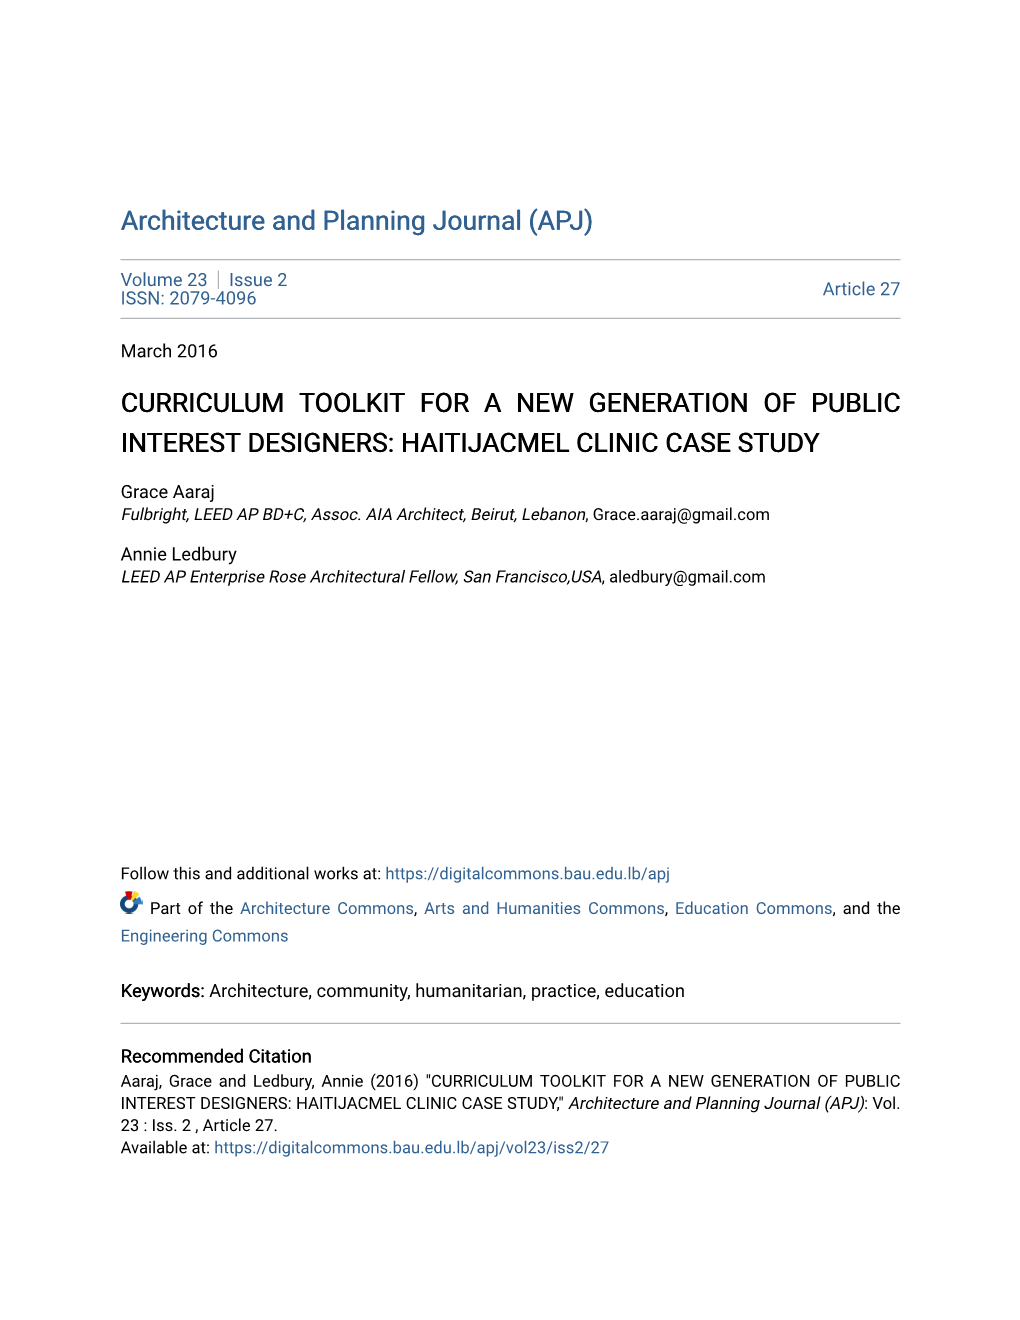 Curriculum Toolkit for a New Generation of Public Interest Designers: Haitijacmel Clinic Case Study